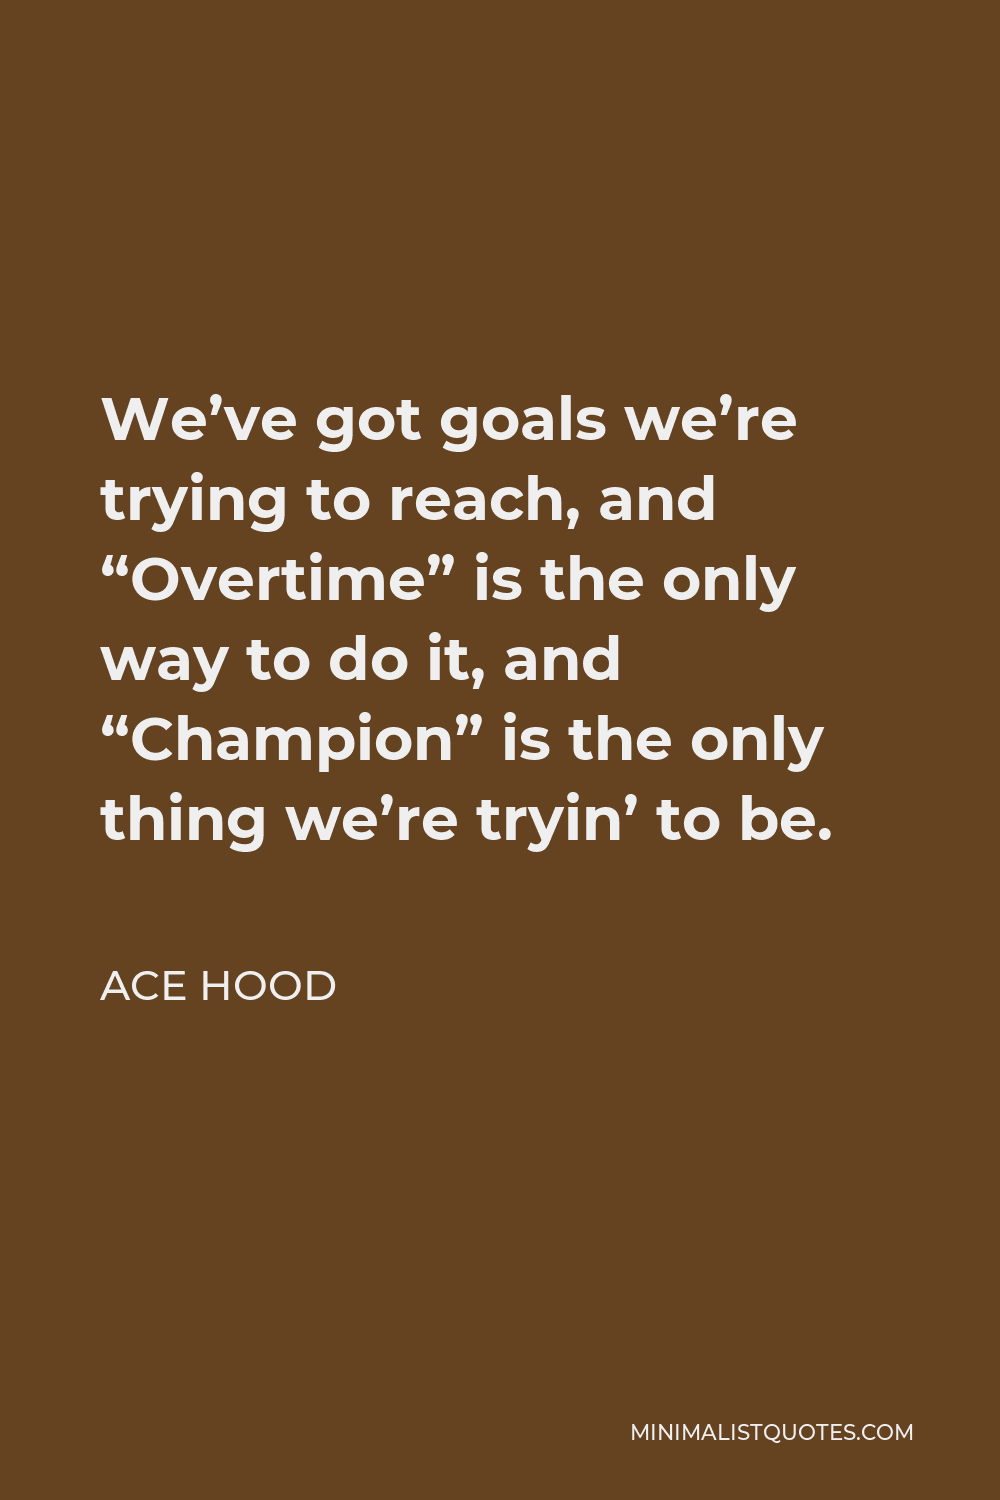 Ace Hood Quote - We’ve got goals we’re trying to reach, and “Overtime” is the only way to do it, and “Champion” is the only thing we’re tryin’ to be.